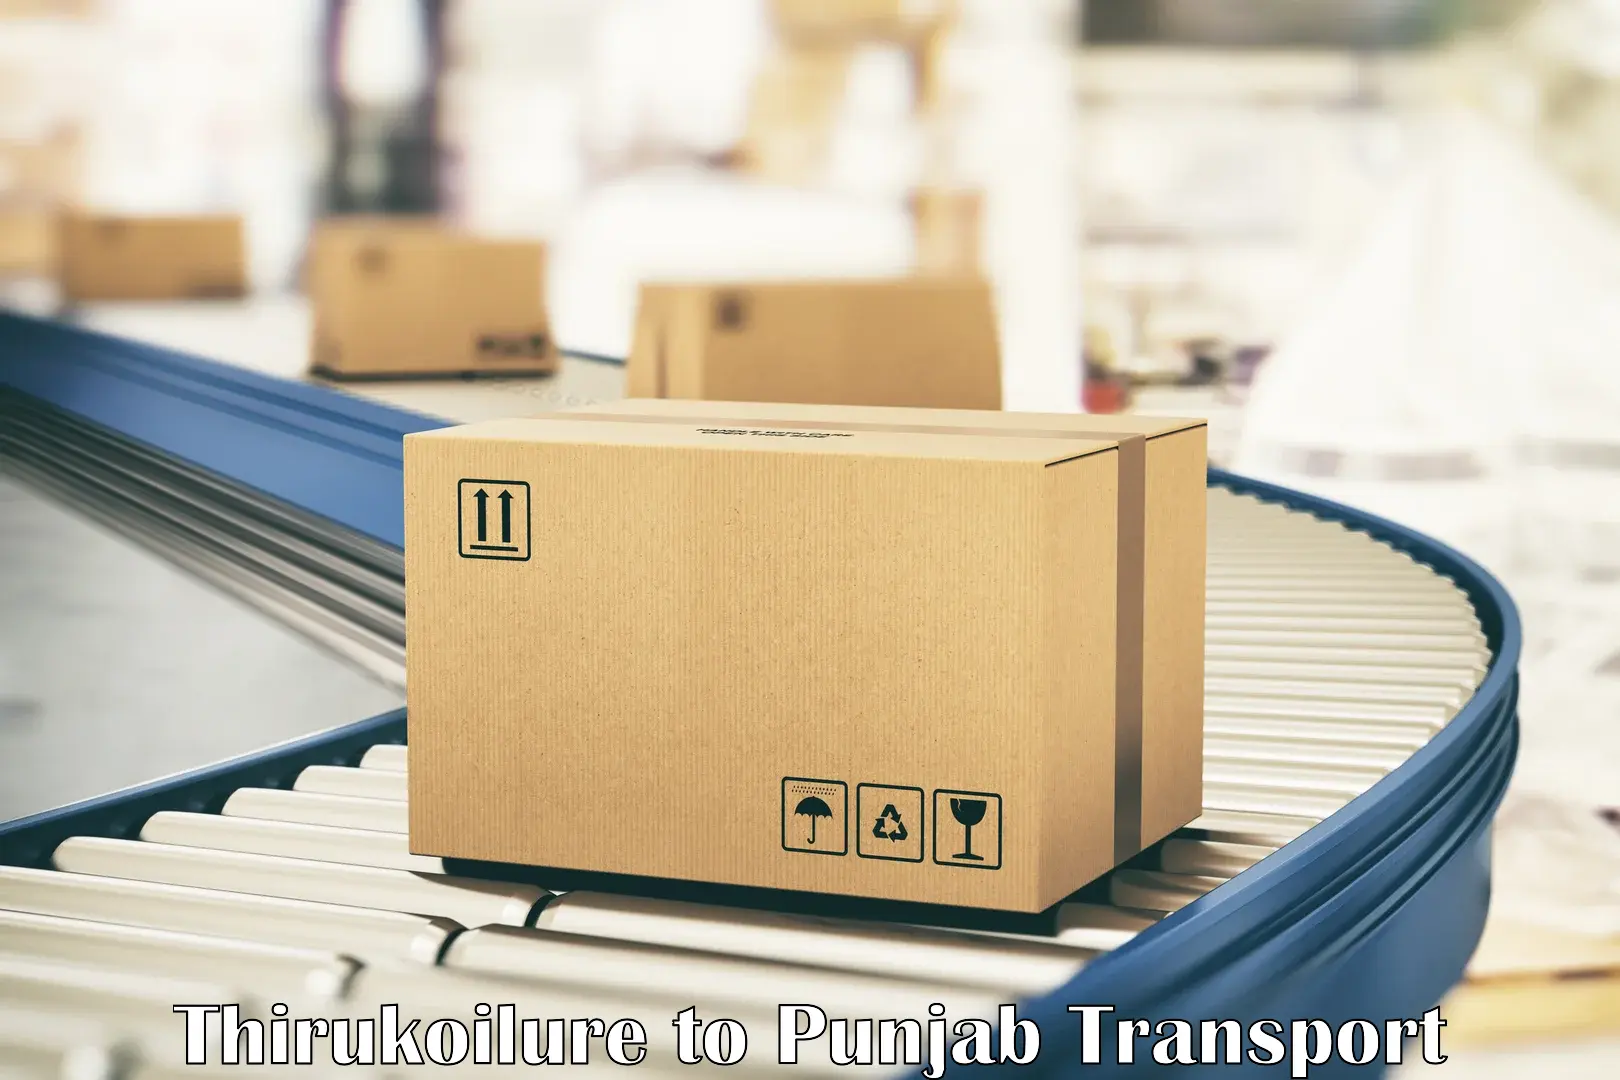 Two wheeler parcel service Thirukoilure to Patiala